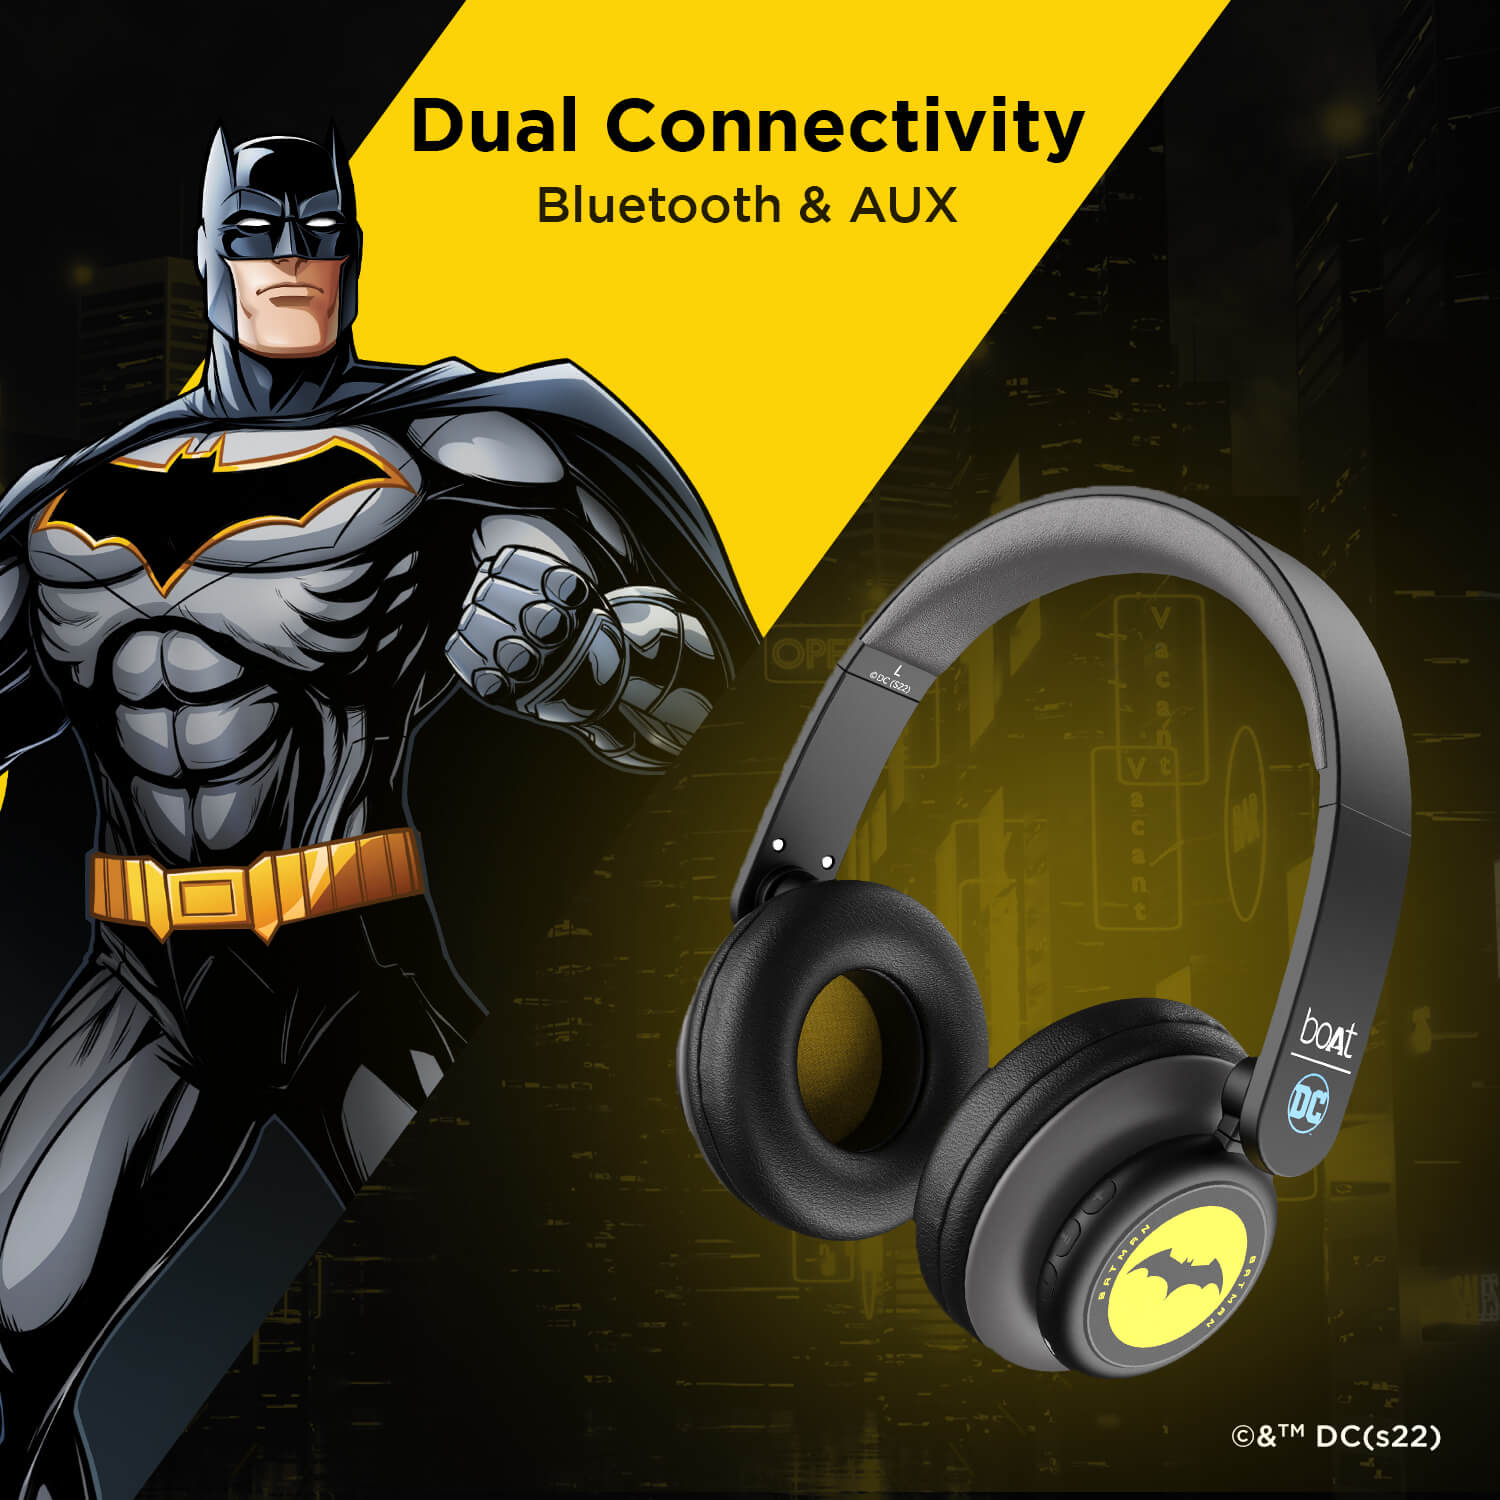 boAt Rockerz 450 Batman DC Edition | Bluetooth Wireless Headphone with 40 mm Drivers HD Immersive Audio, Power Up For 15HRS